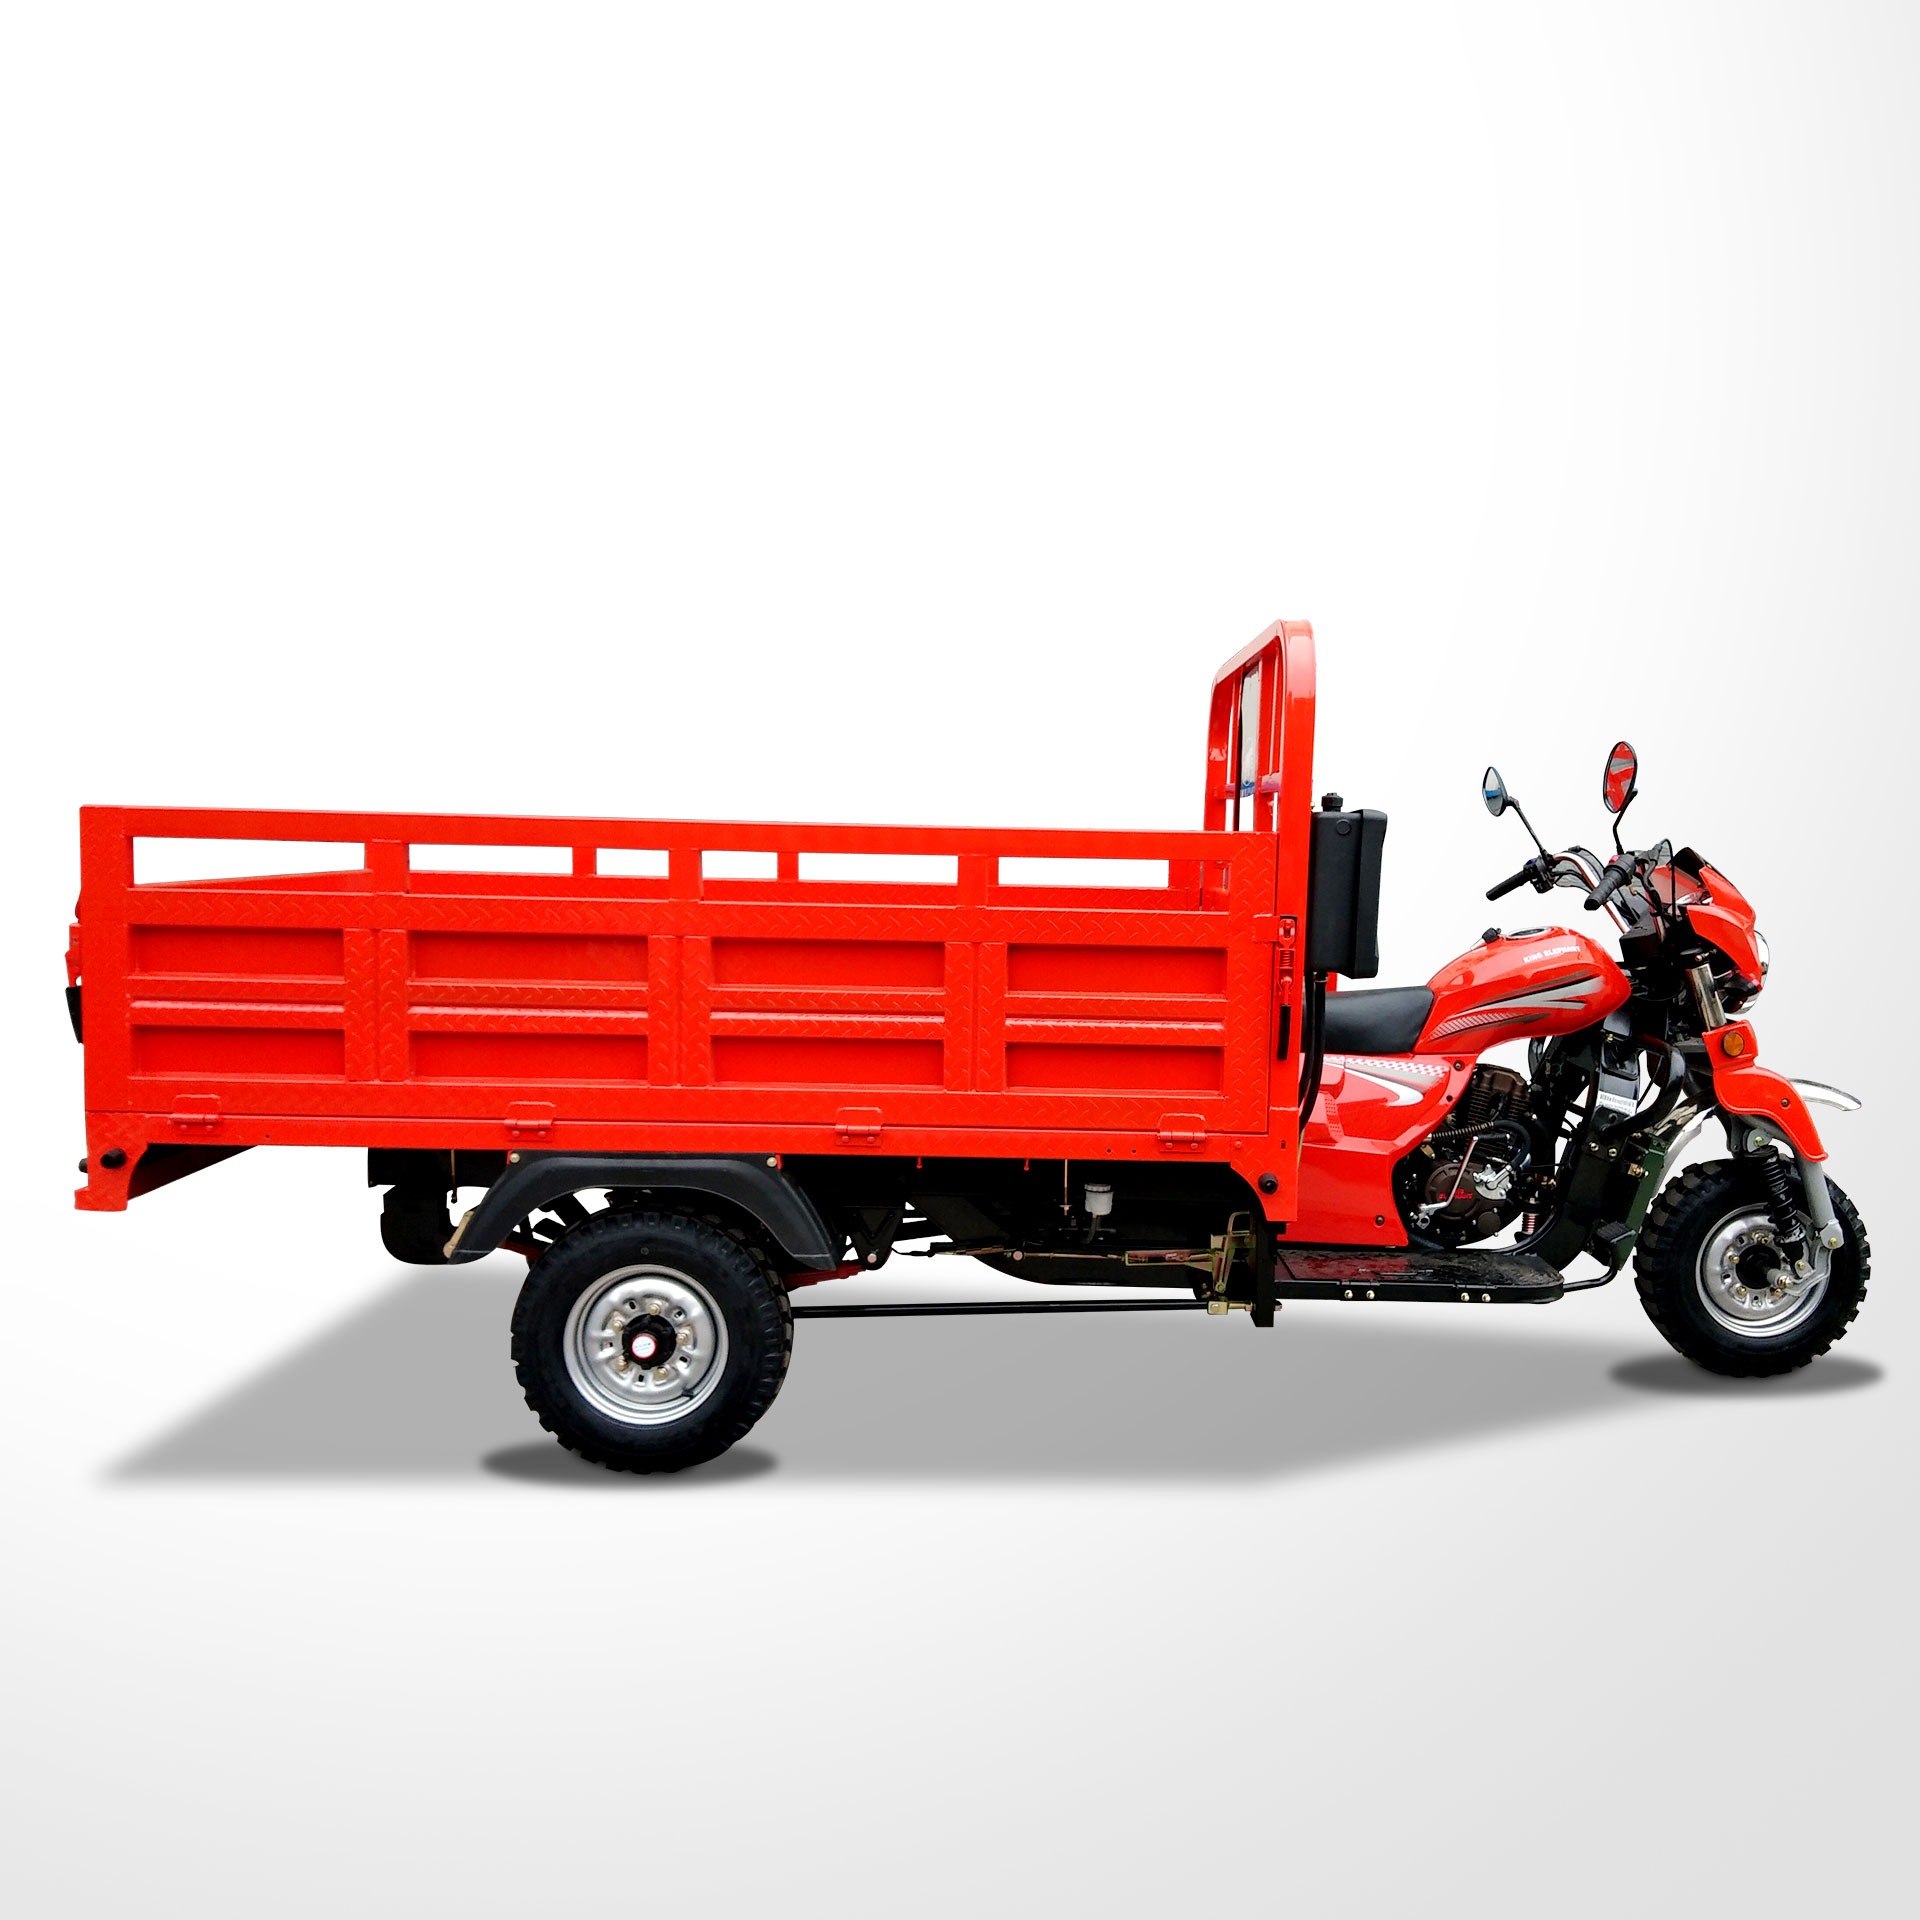 DAYANG Factory Direct Sales kick adult fuel oil petrol gasoline strong motorized cargo tricycles cmg